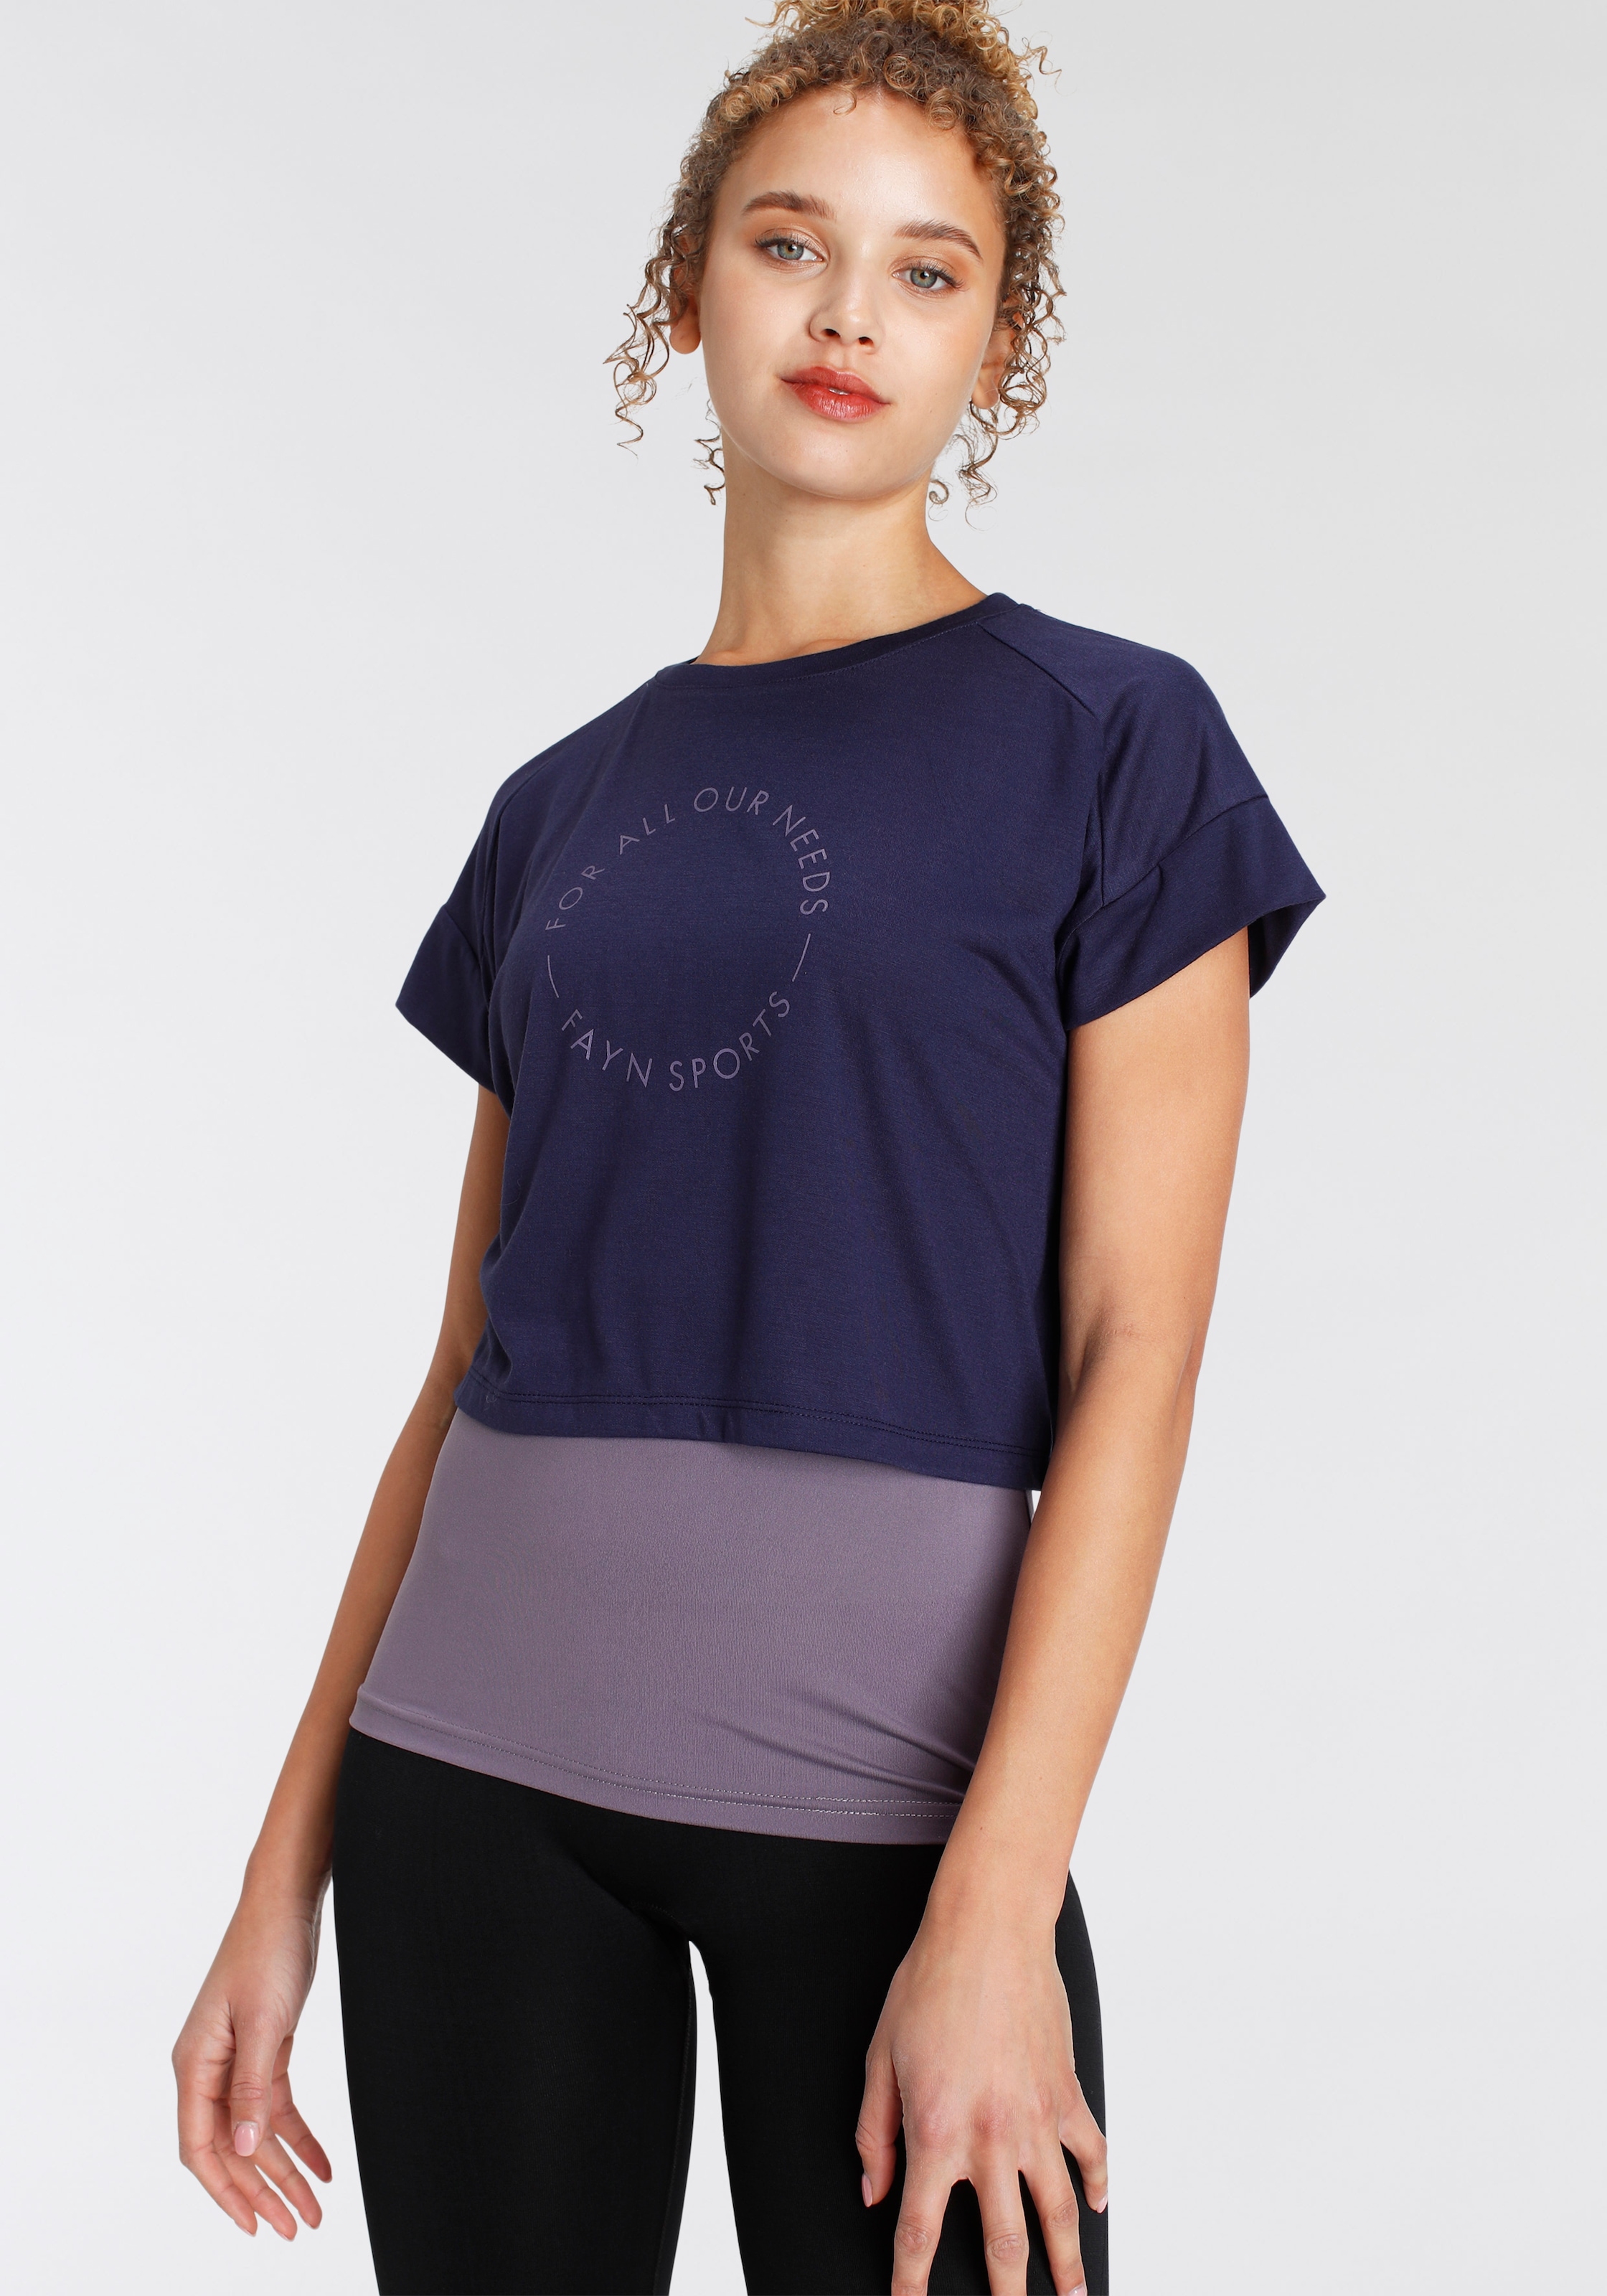 tlg.) FAYN (Set, bei Top«, T-Shirt SPORTS 2 »Cropped ♕